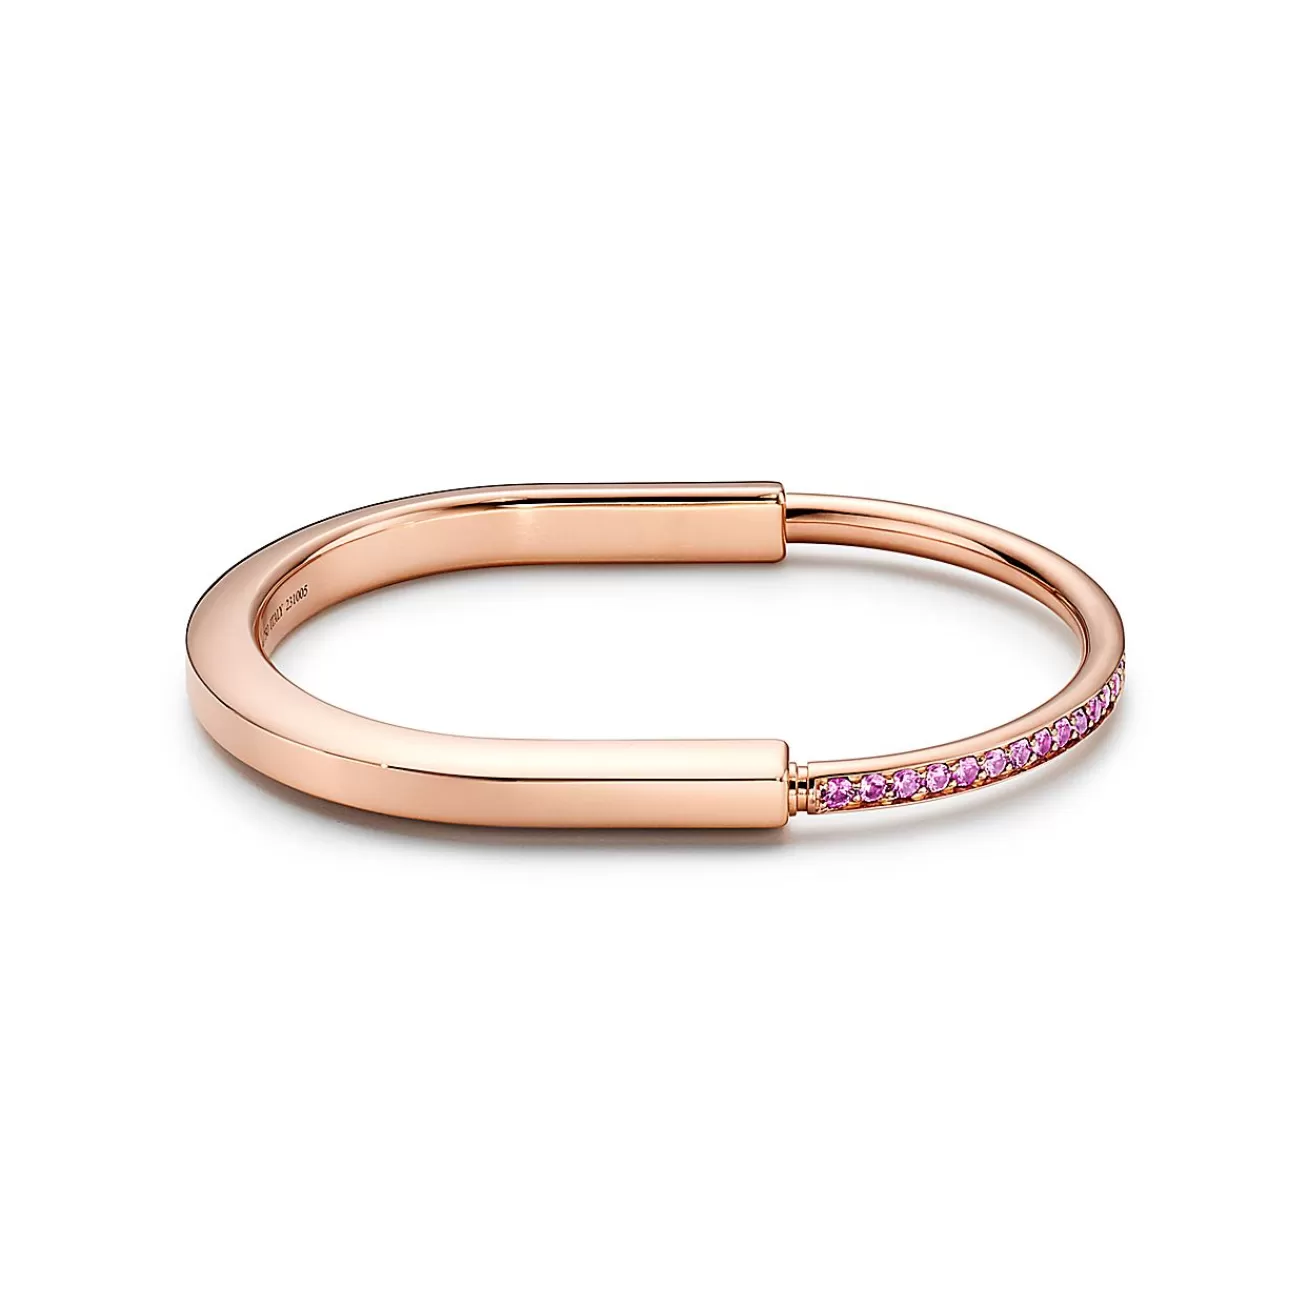 Tiffany & Co. Tiffany Lock Bangle in Rose Gold with Pink Sapphires | ^ Bracelets | New Jewelry